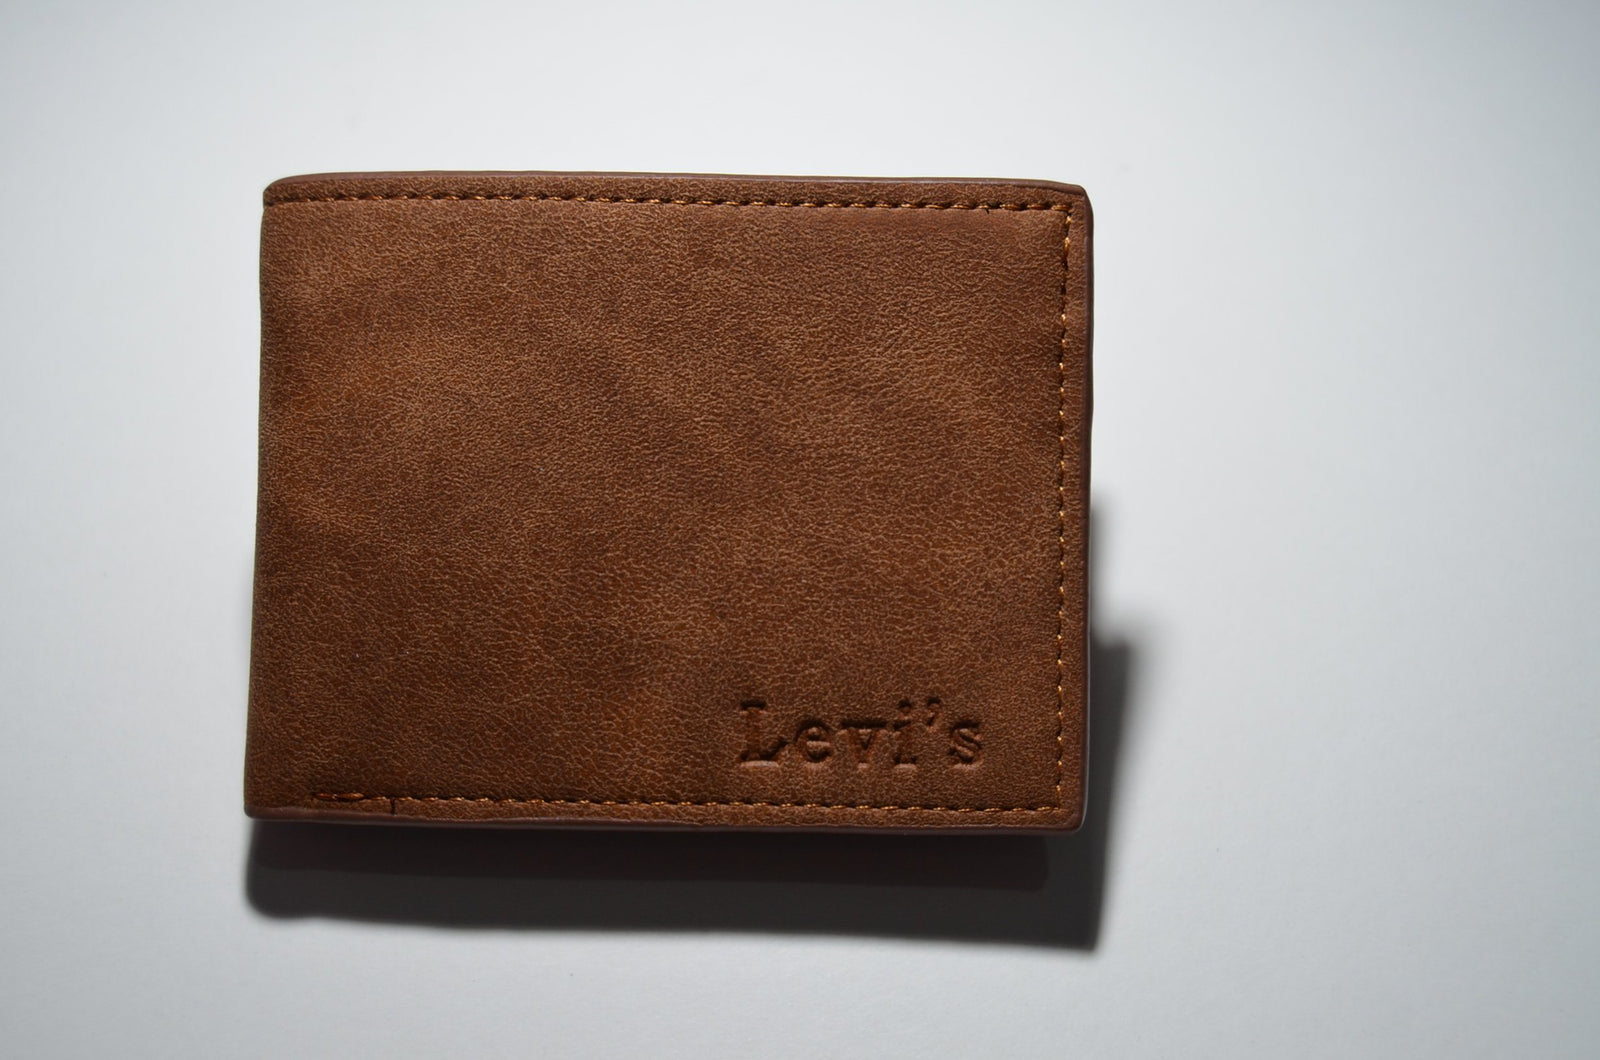 Levi's Mens Trifold Security Leather Wallet RFID Blocking Select Color  Style | eBay